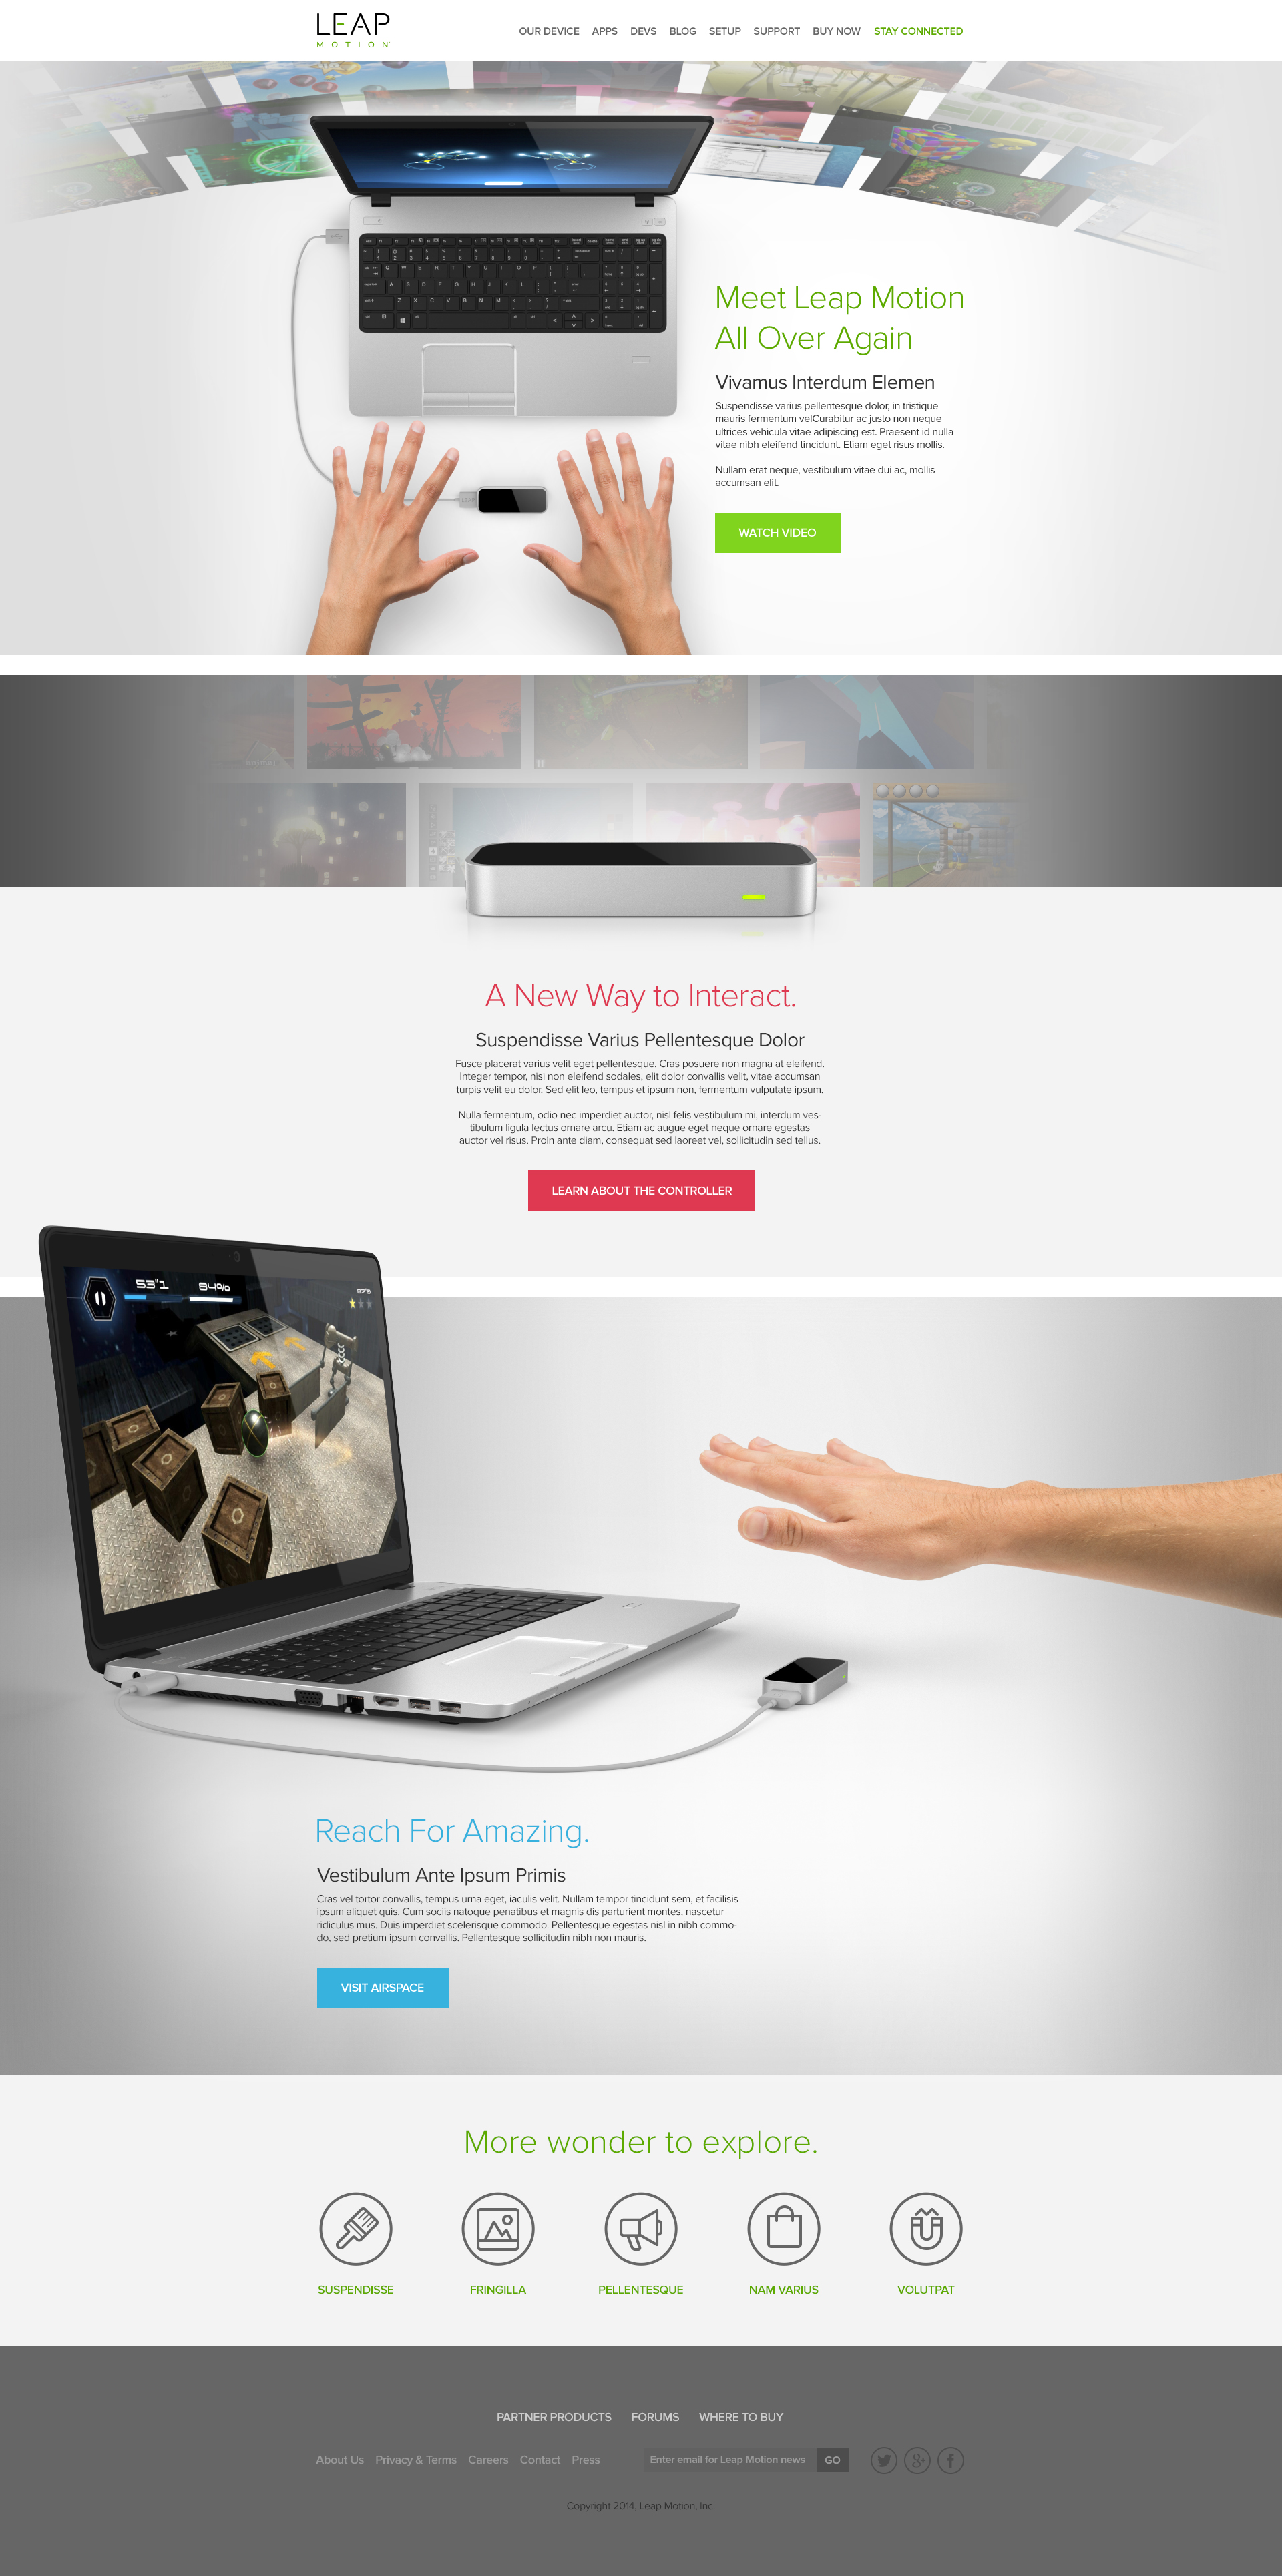 Leap_Motion_Homepage_01